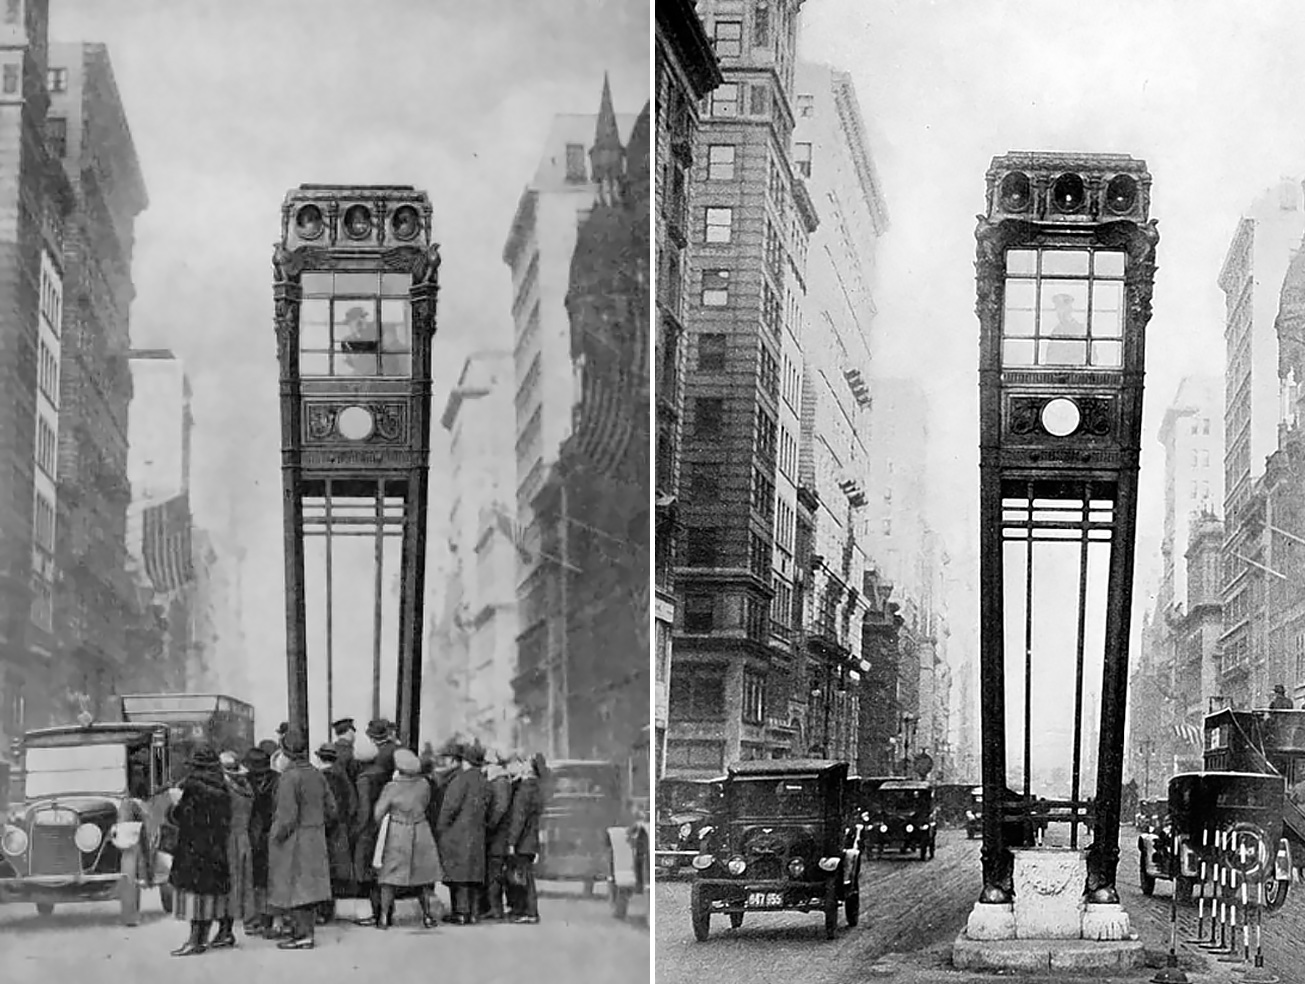 Stunning Photographs of Bronze Traffic Signal Towers in New York City From the 1920s